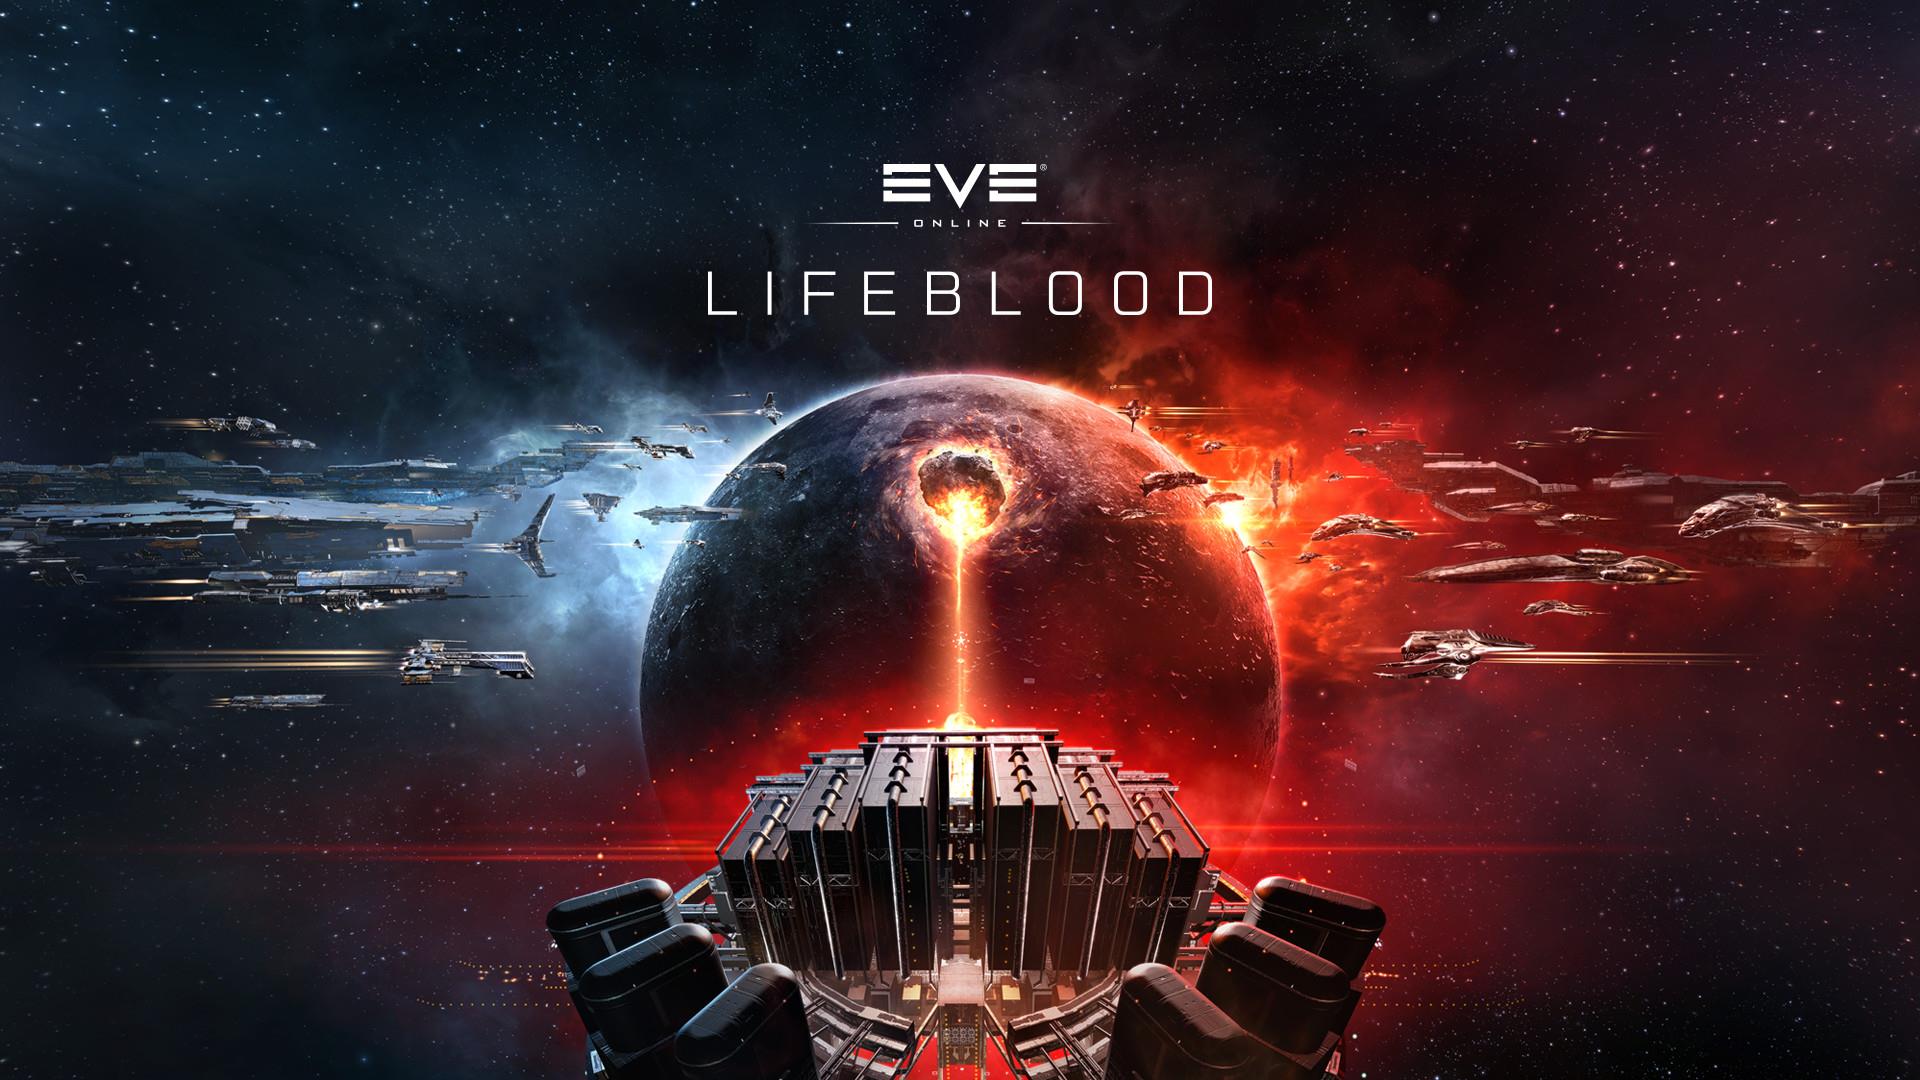 EVE Online’s Lifeblood Expansion Fuels the Galaxy’s Fire